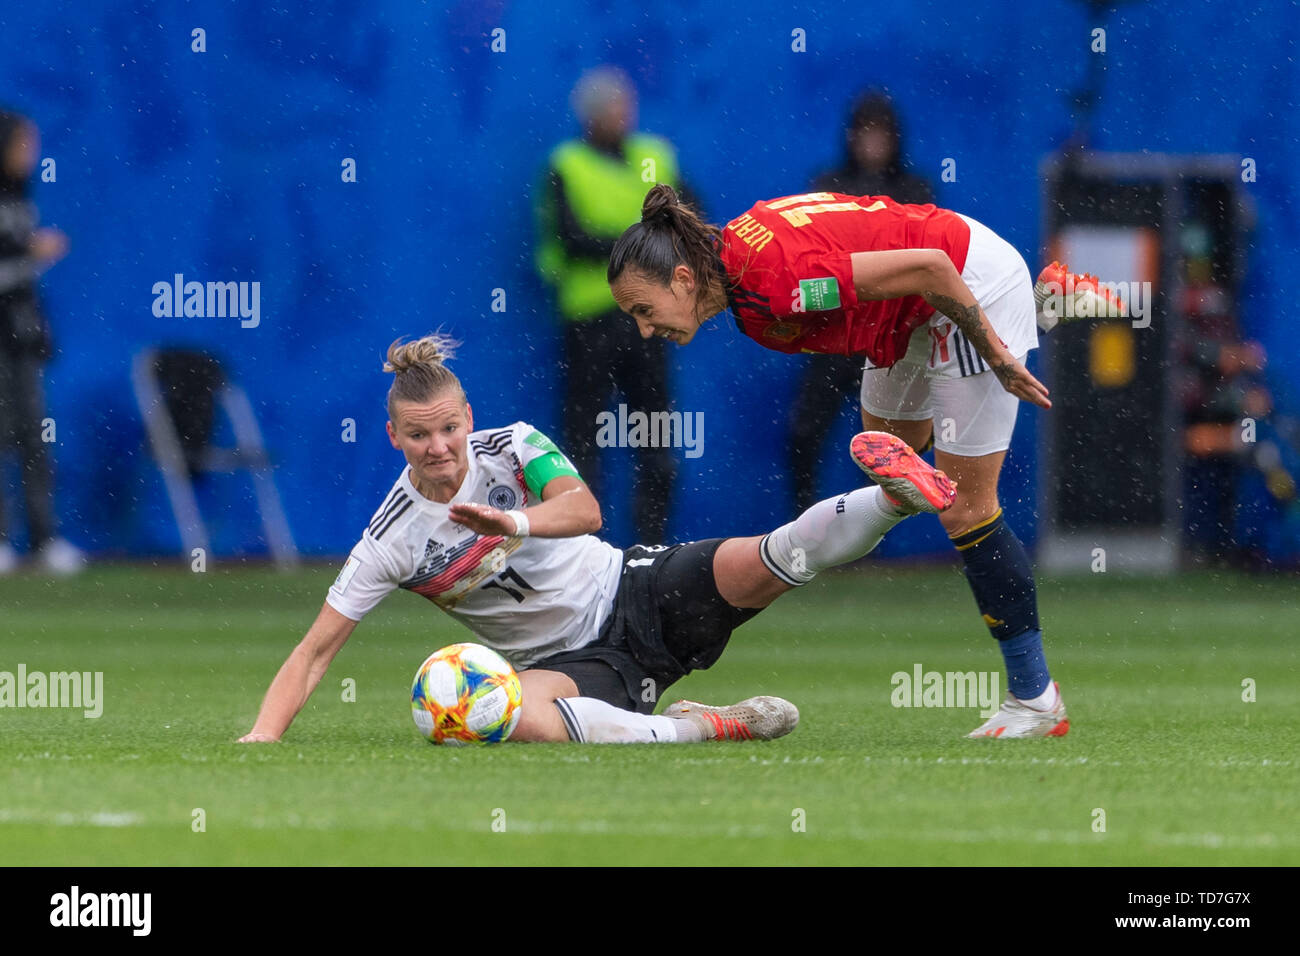 Valenciennes, France. 12th June, 2019. Alexandra Popp (Germany) Virginia Torrecilla (Spain) during the FIFA Women's World Cup France 2019 Group B match between Germany 1-0 Spain at Hainaut Stadium in Valenciennes, France, June12, 2019. Credit: Aflo Co. Ltd./Alamy Live News Stock Photo